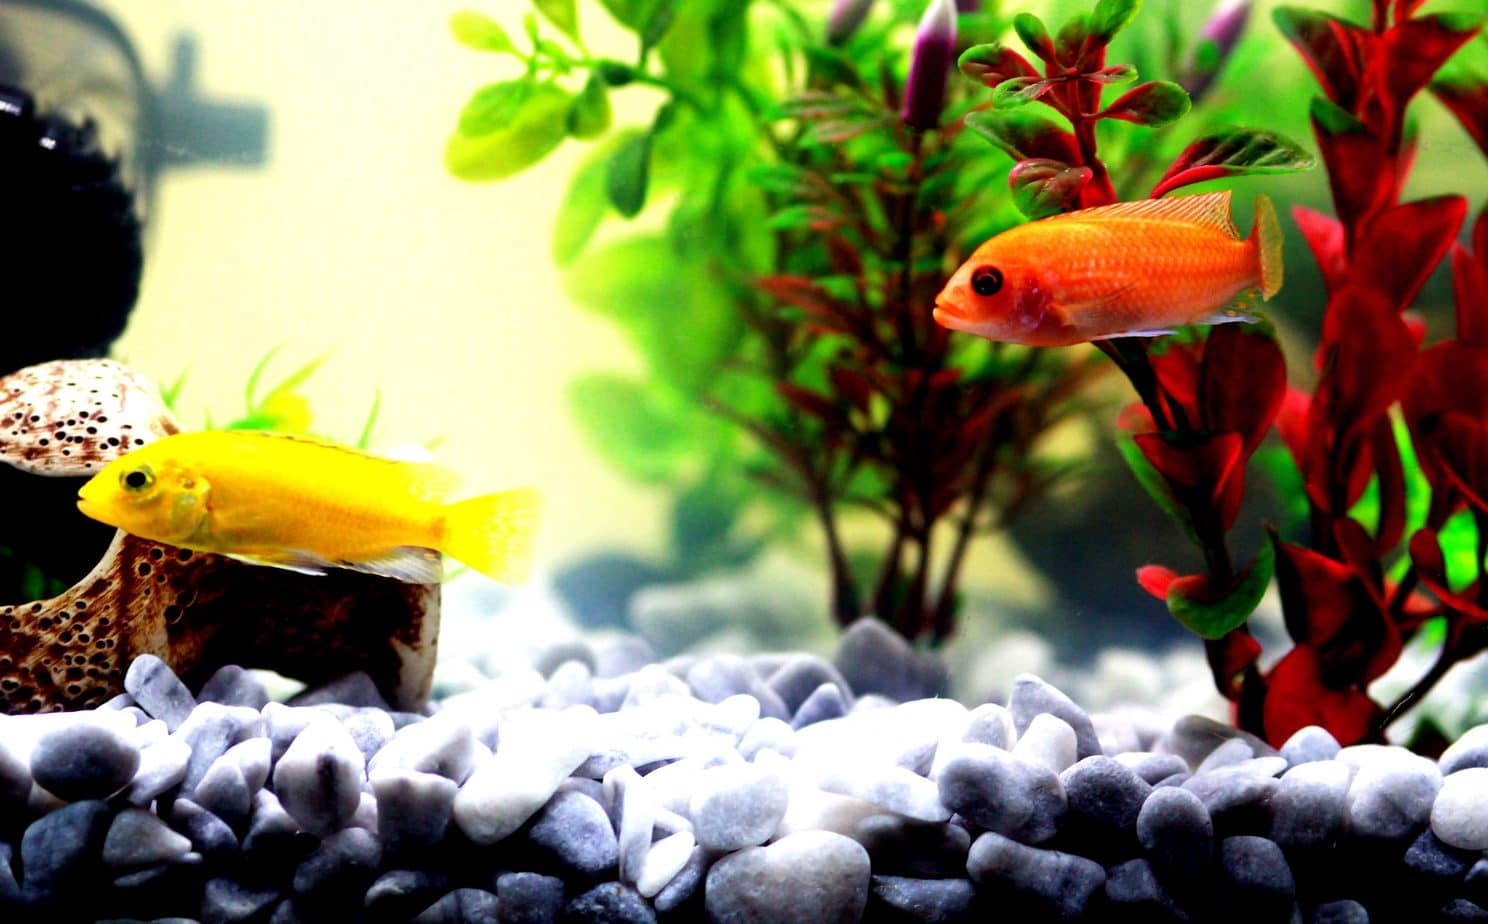 The most common mistakes when setting up an aquarium – how to avoid them?